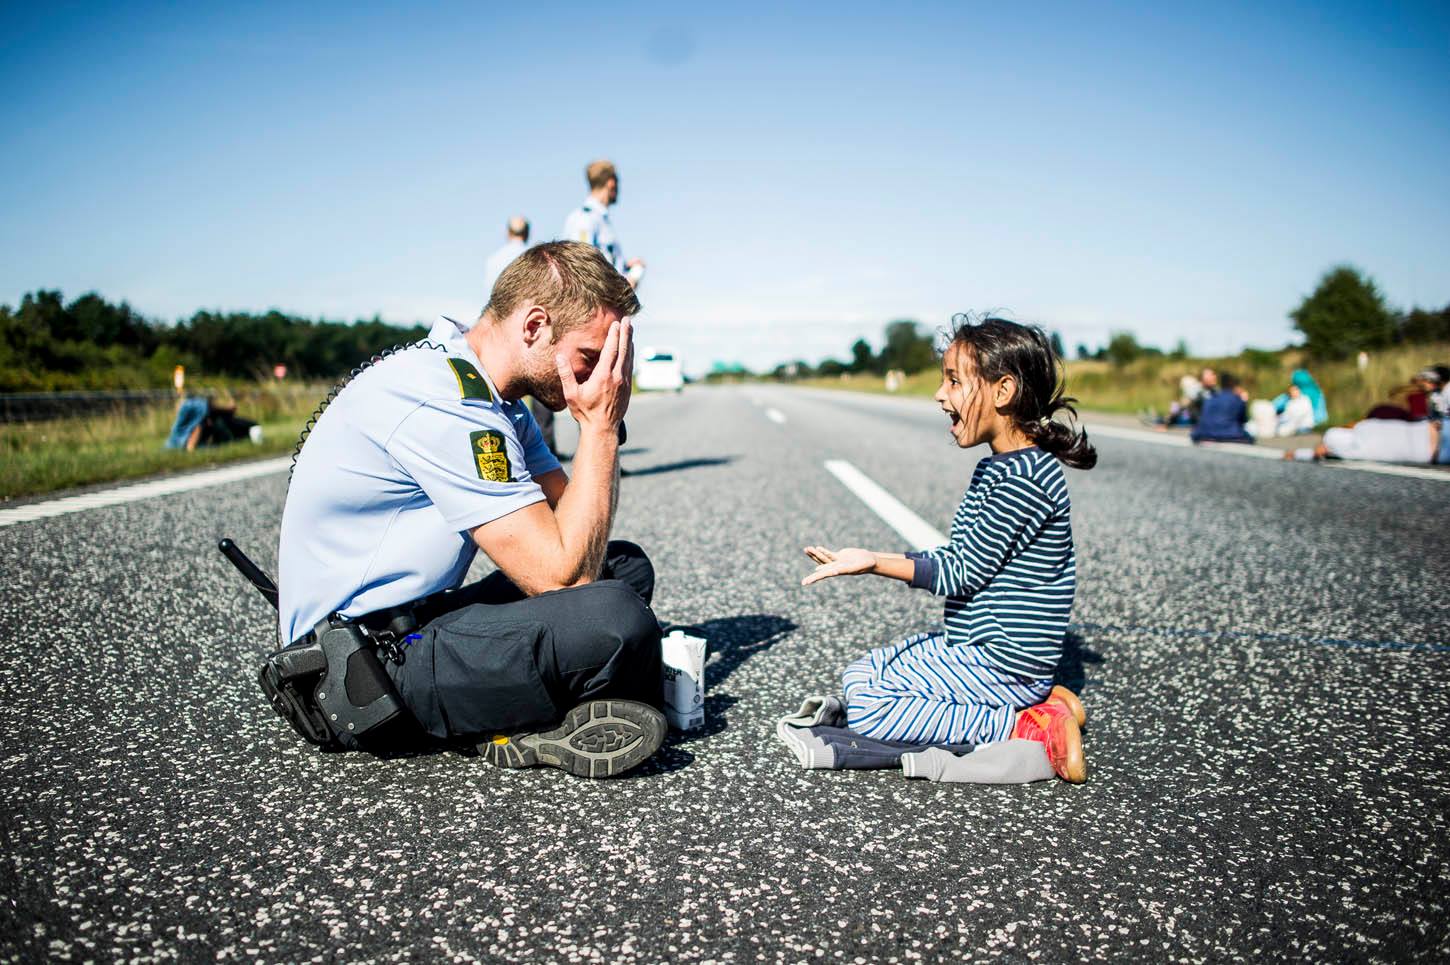 Danish police officer playing “hide the ring” with Syrian refugee